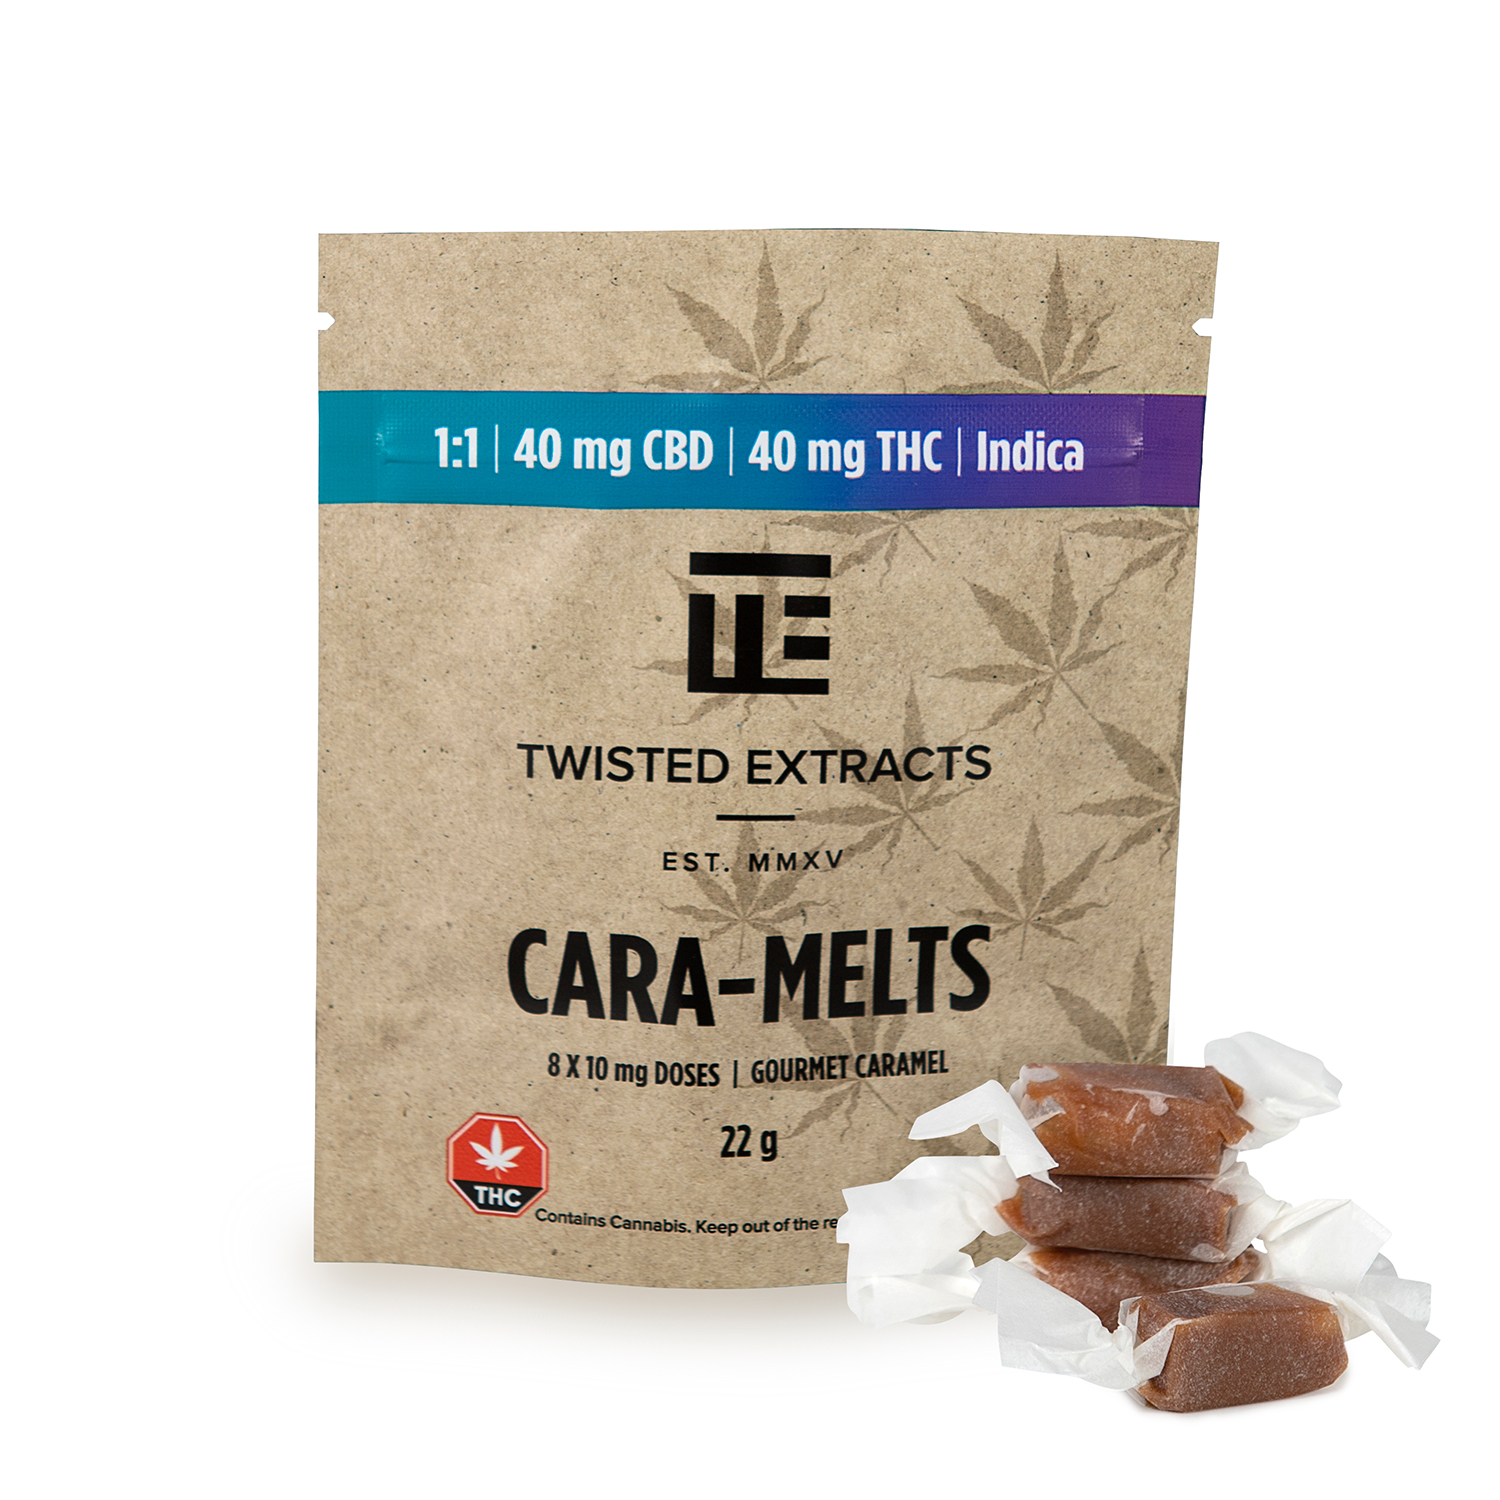 Twisted Extracts Cara-Melts Indica 1:1